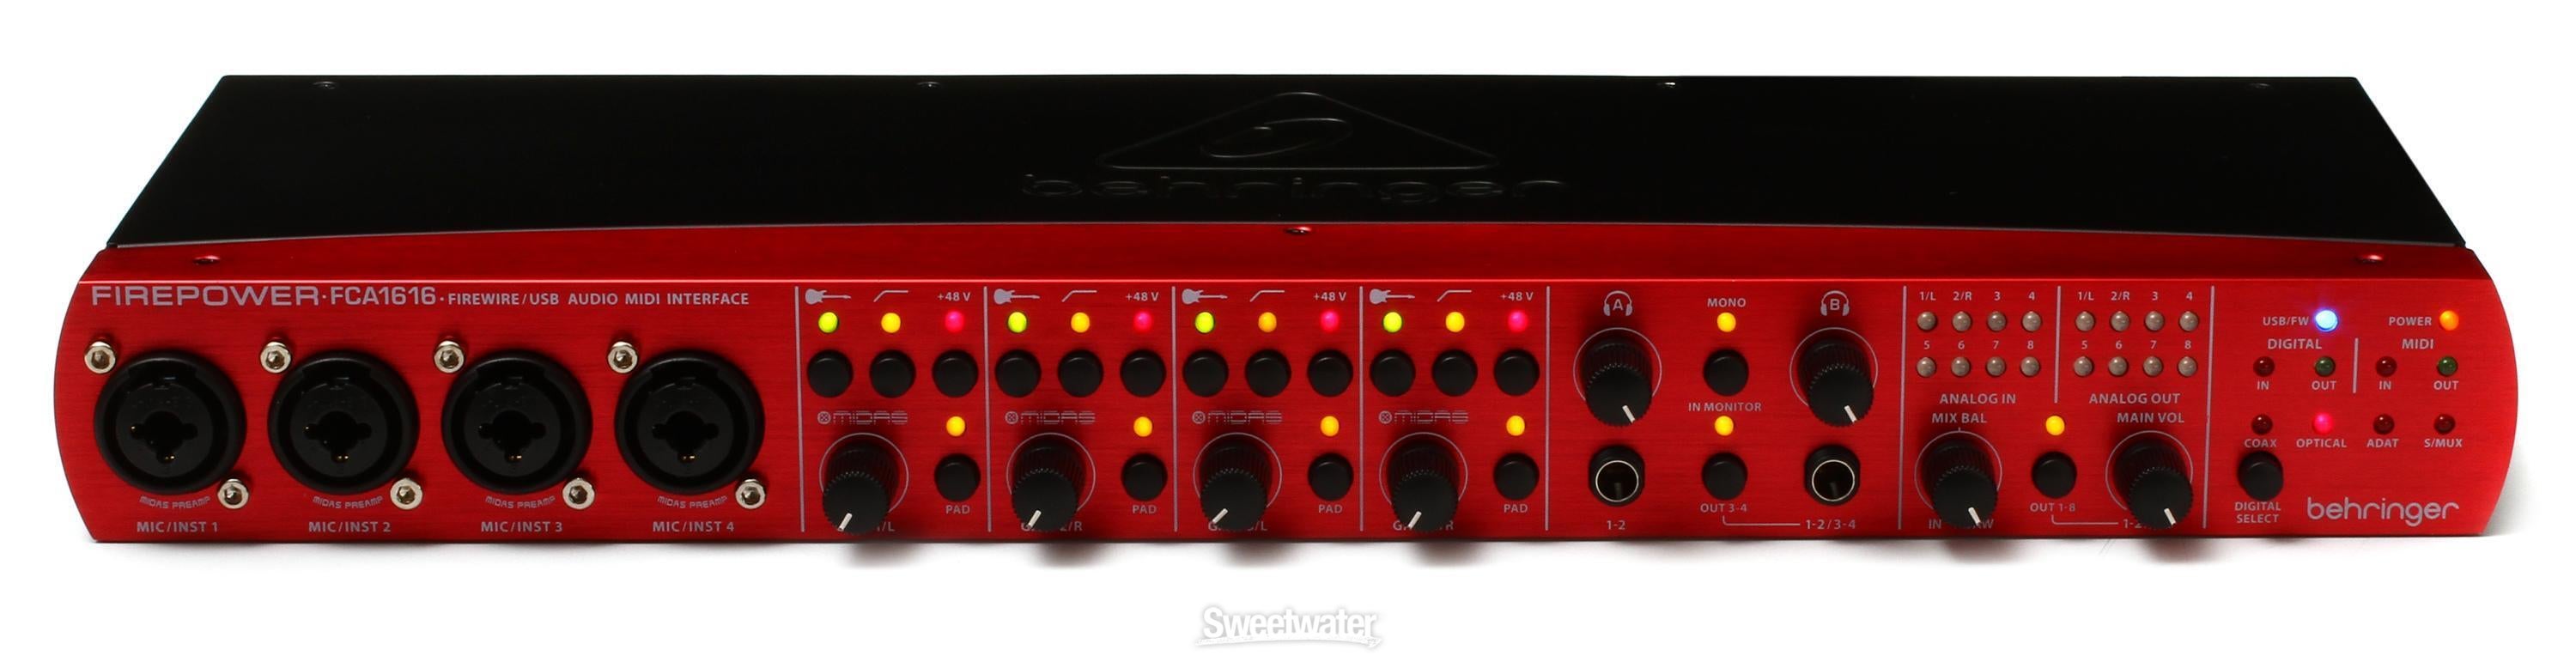 Behringer FCA1616 Reviews | Sweetwater